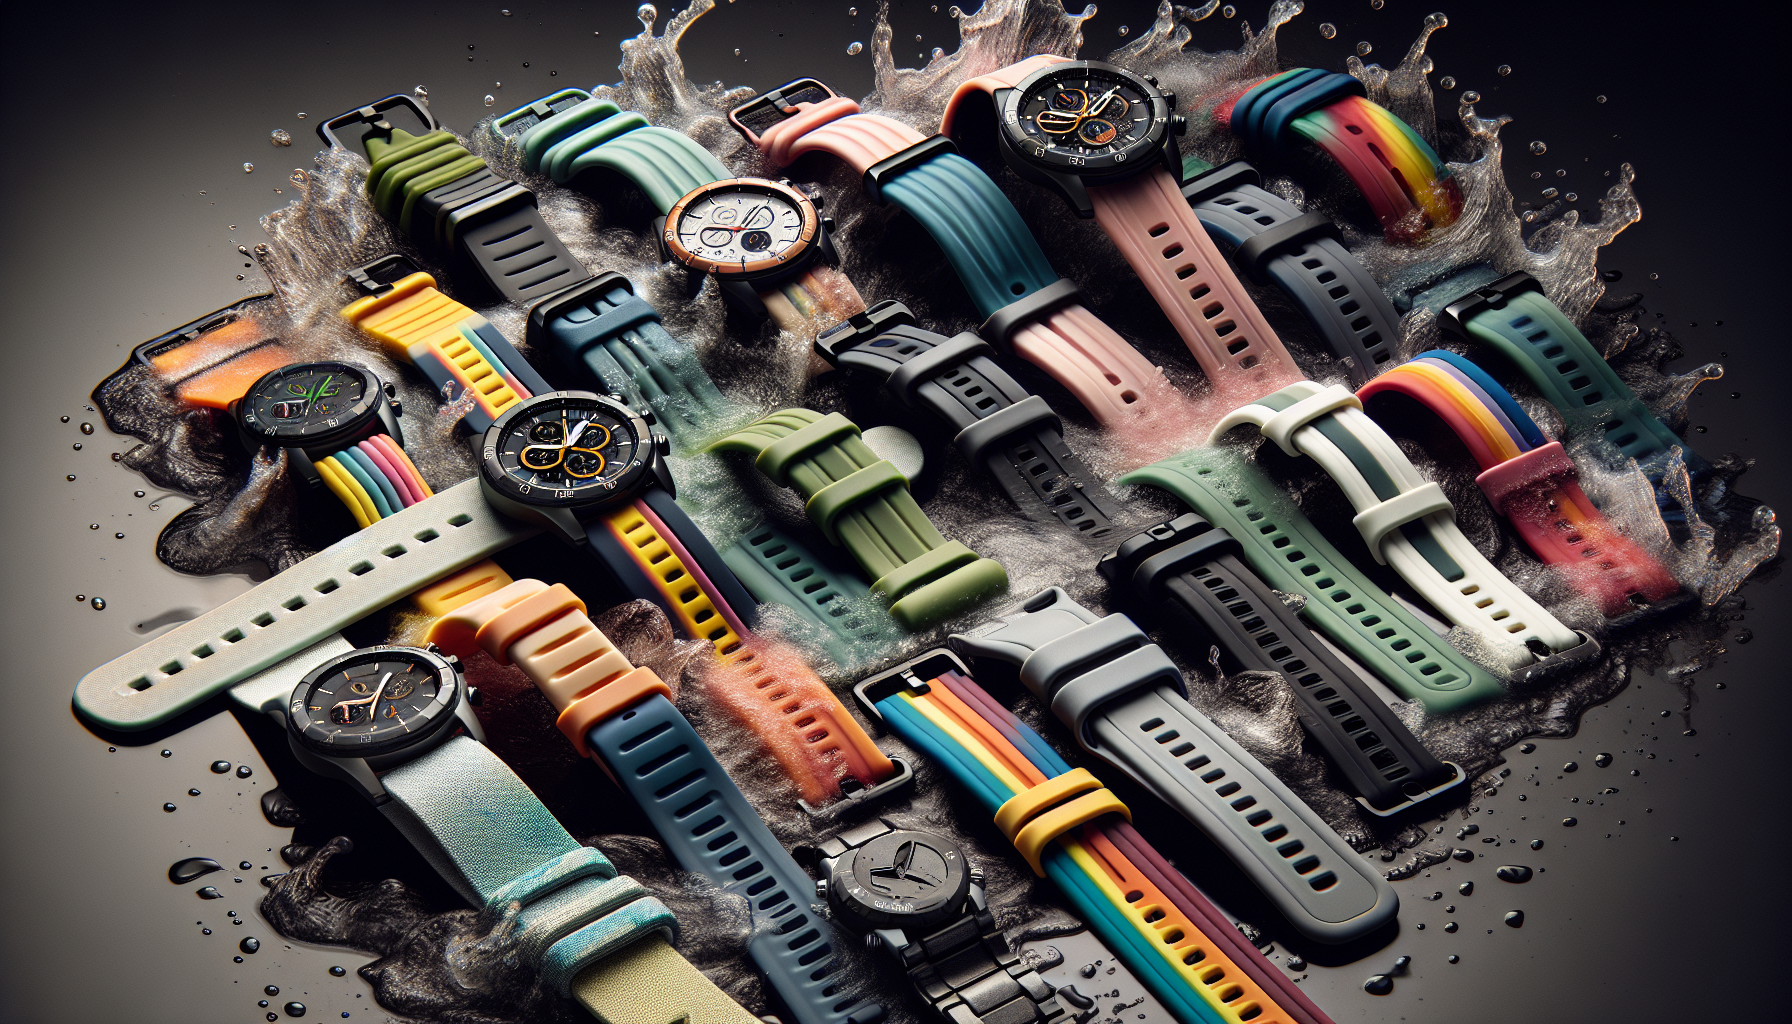 Various sport watch bands displayed in a stylish manner